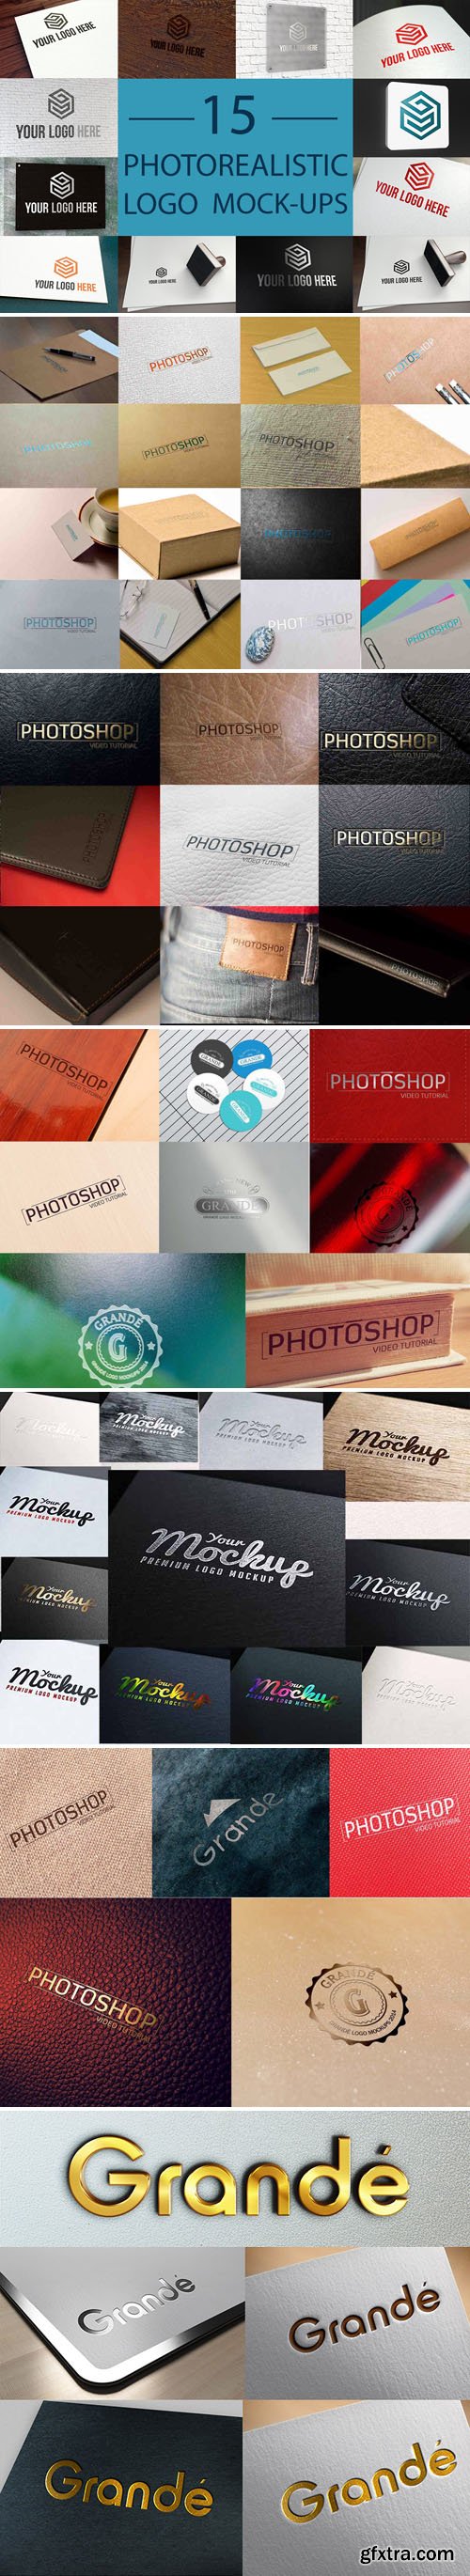 70 Awesome Logos PSD Mockups Collection